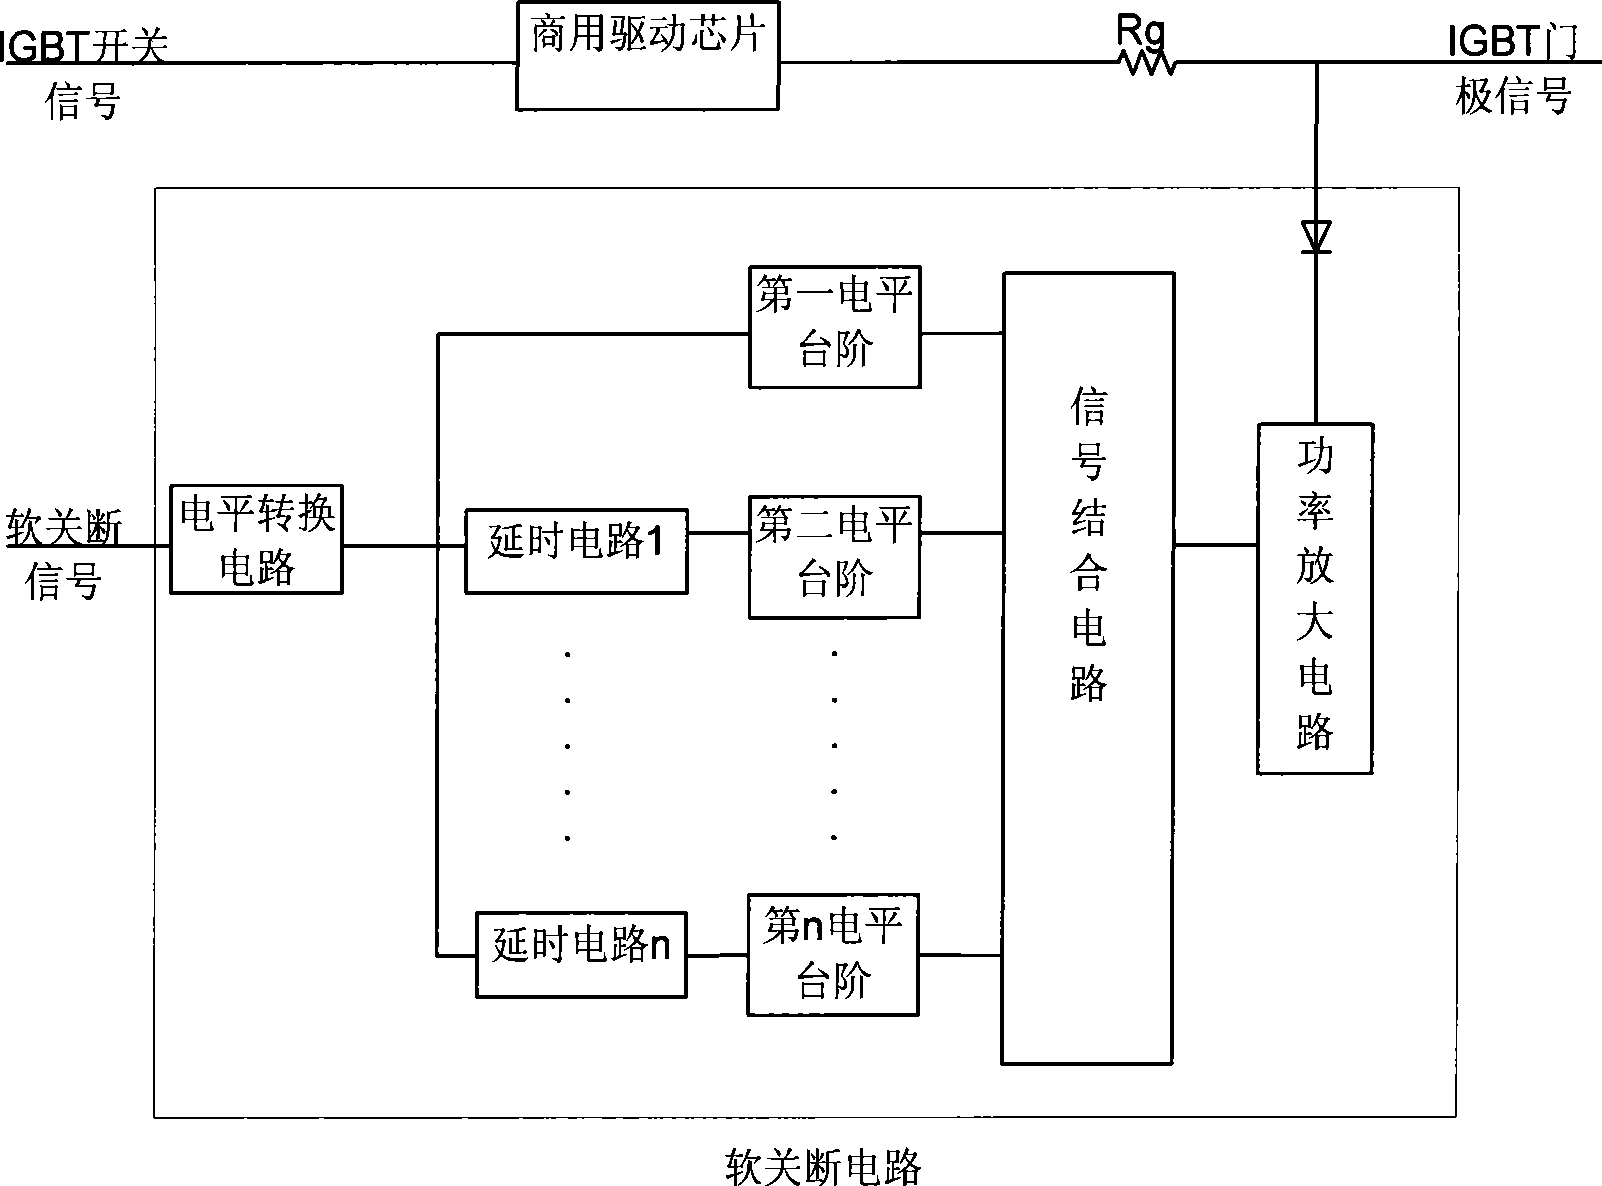 Soft breaking circuit suitable for large power IGBT commercial driver chip